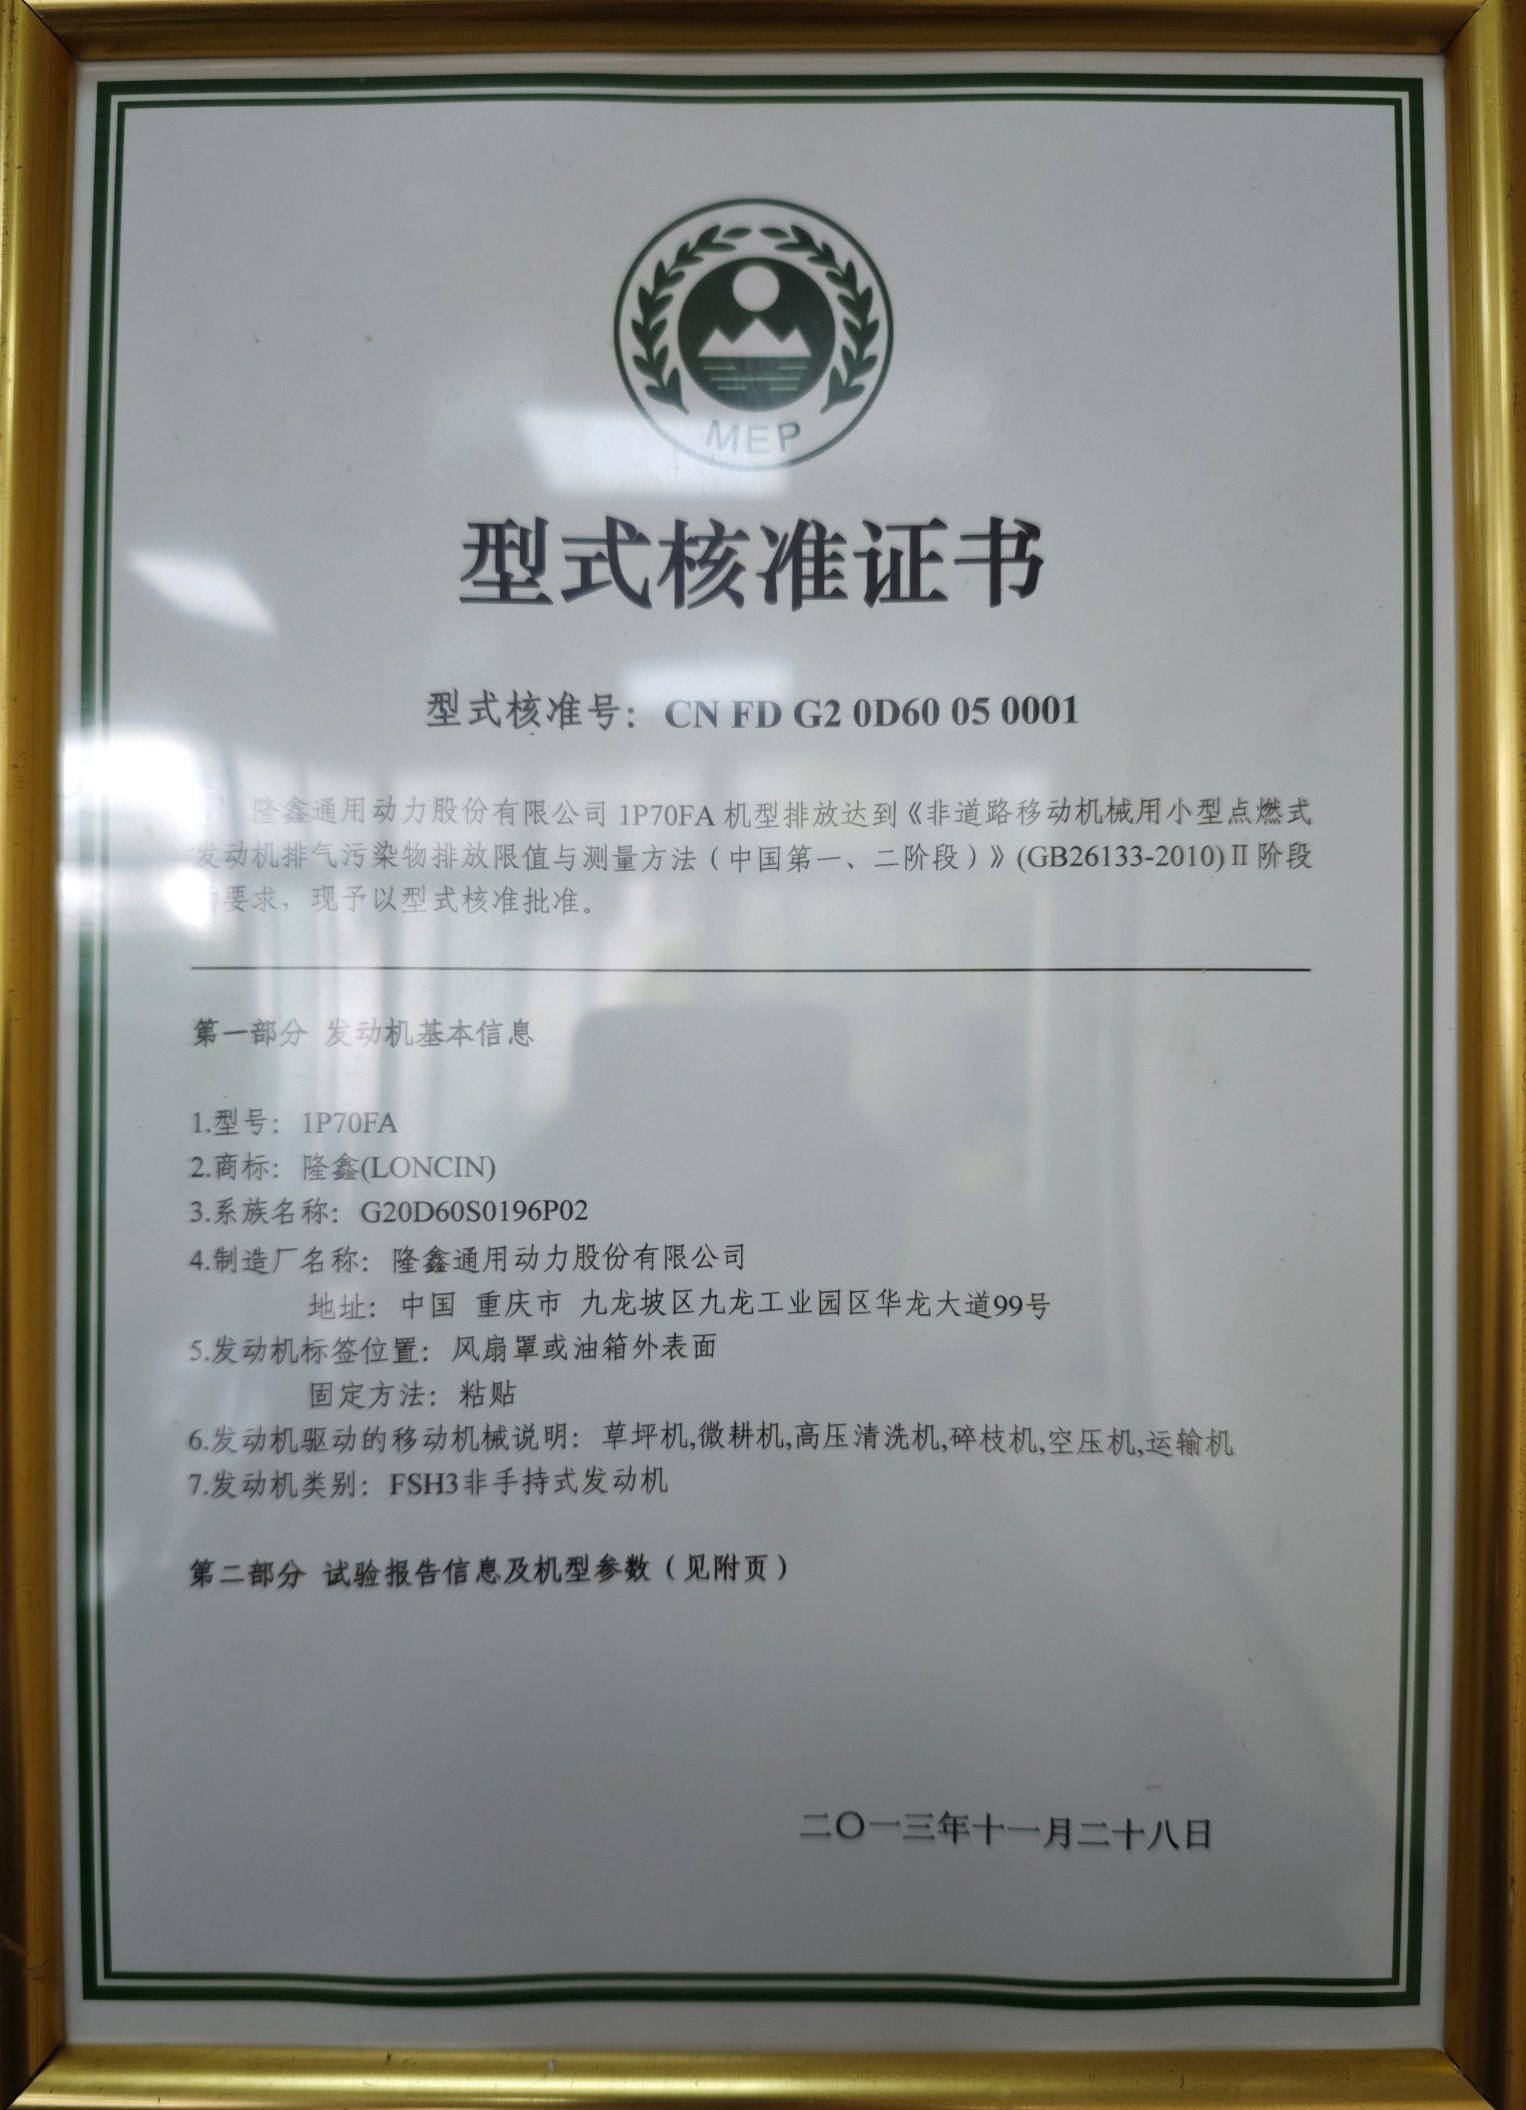 Type approval certificate